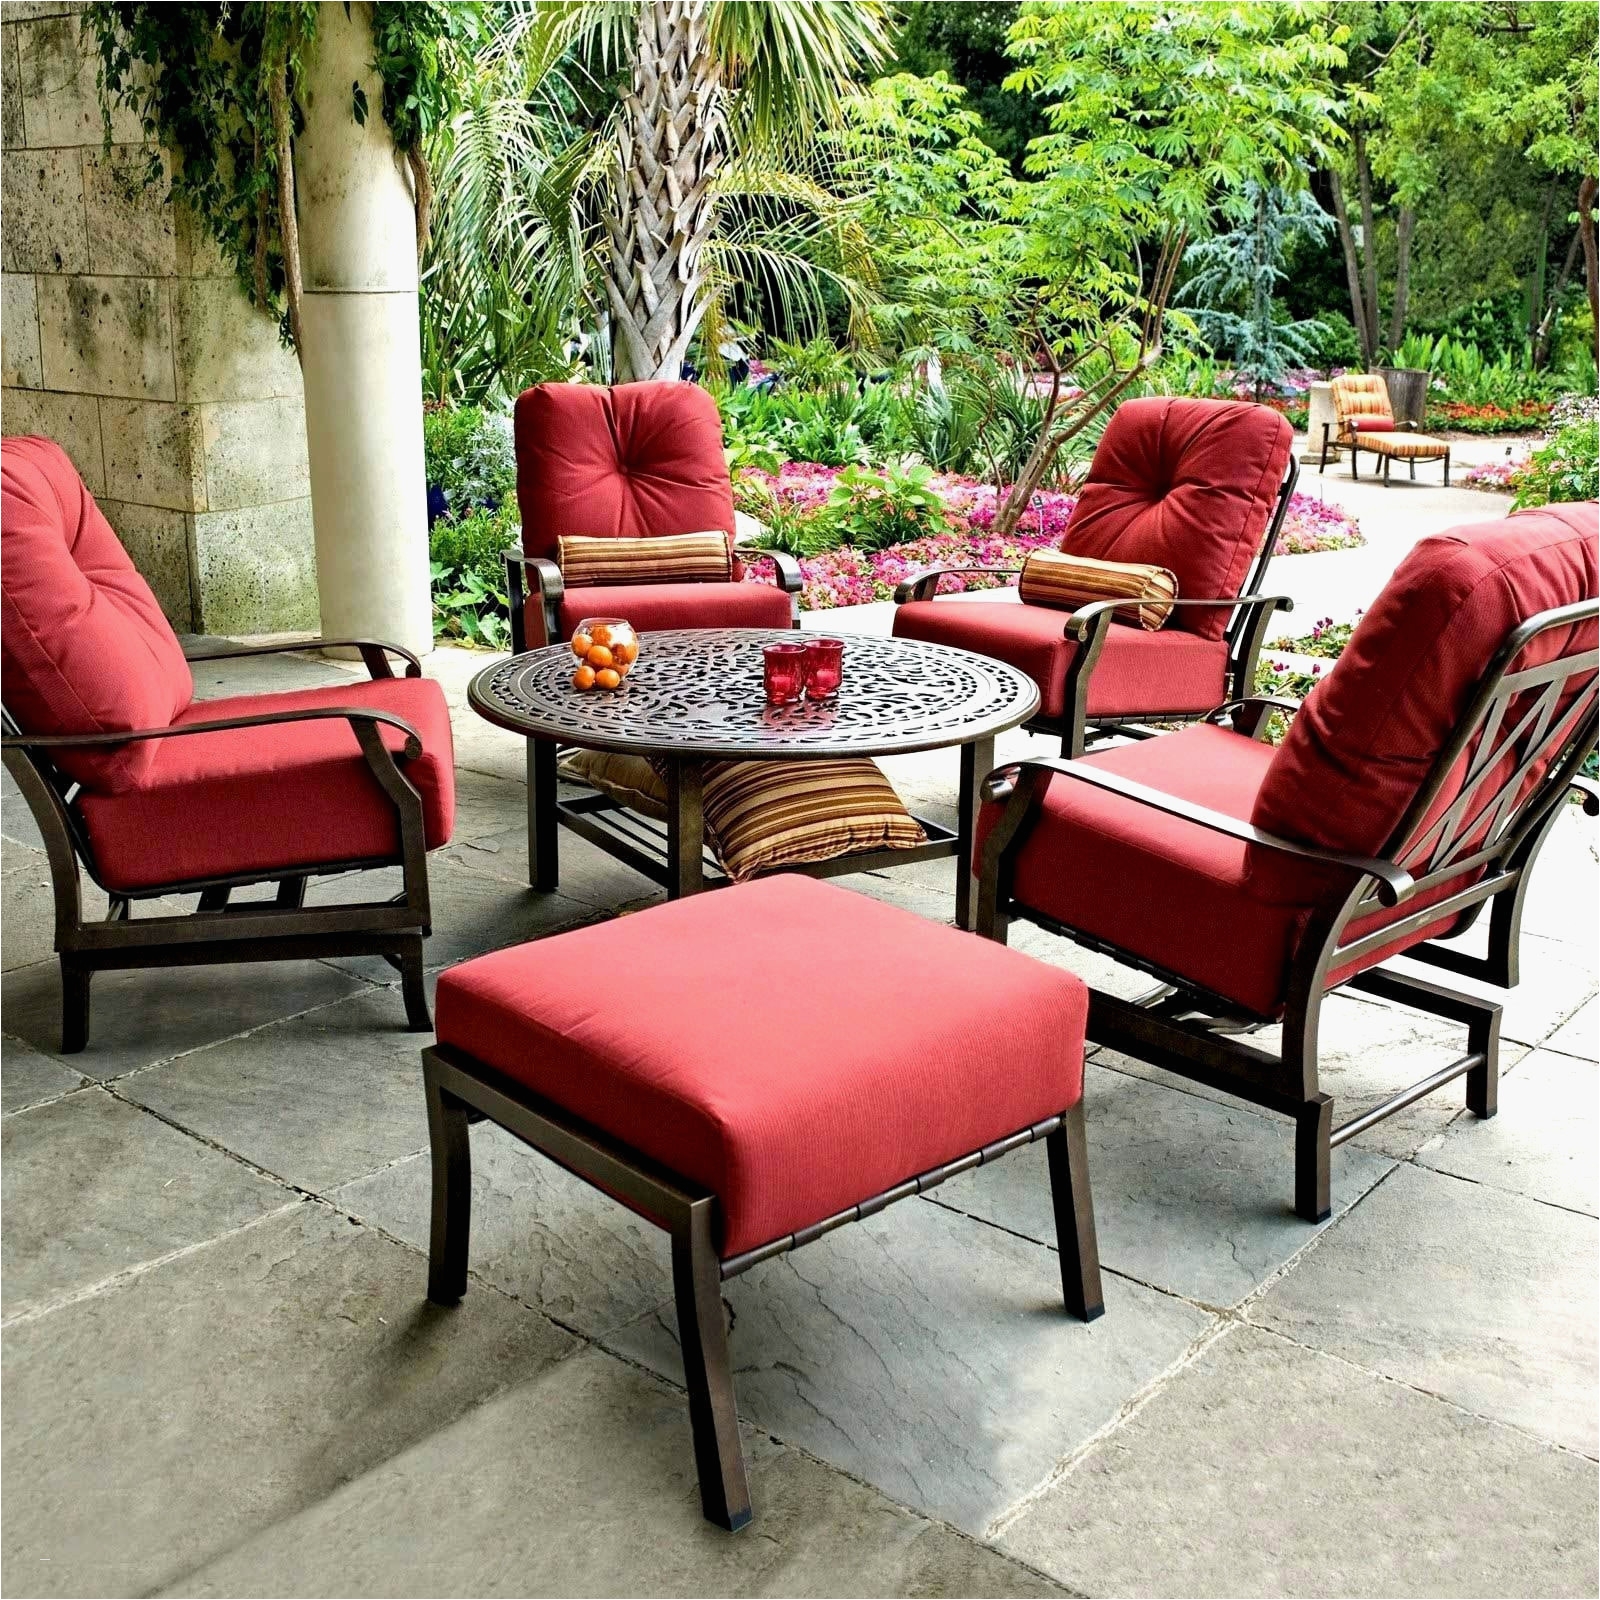 sears outlet patio furniture unique ikea patio set new luxuria¶s wicker outdoor sofa 0d patio chairs